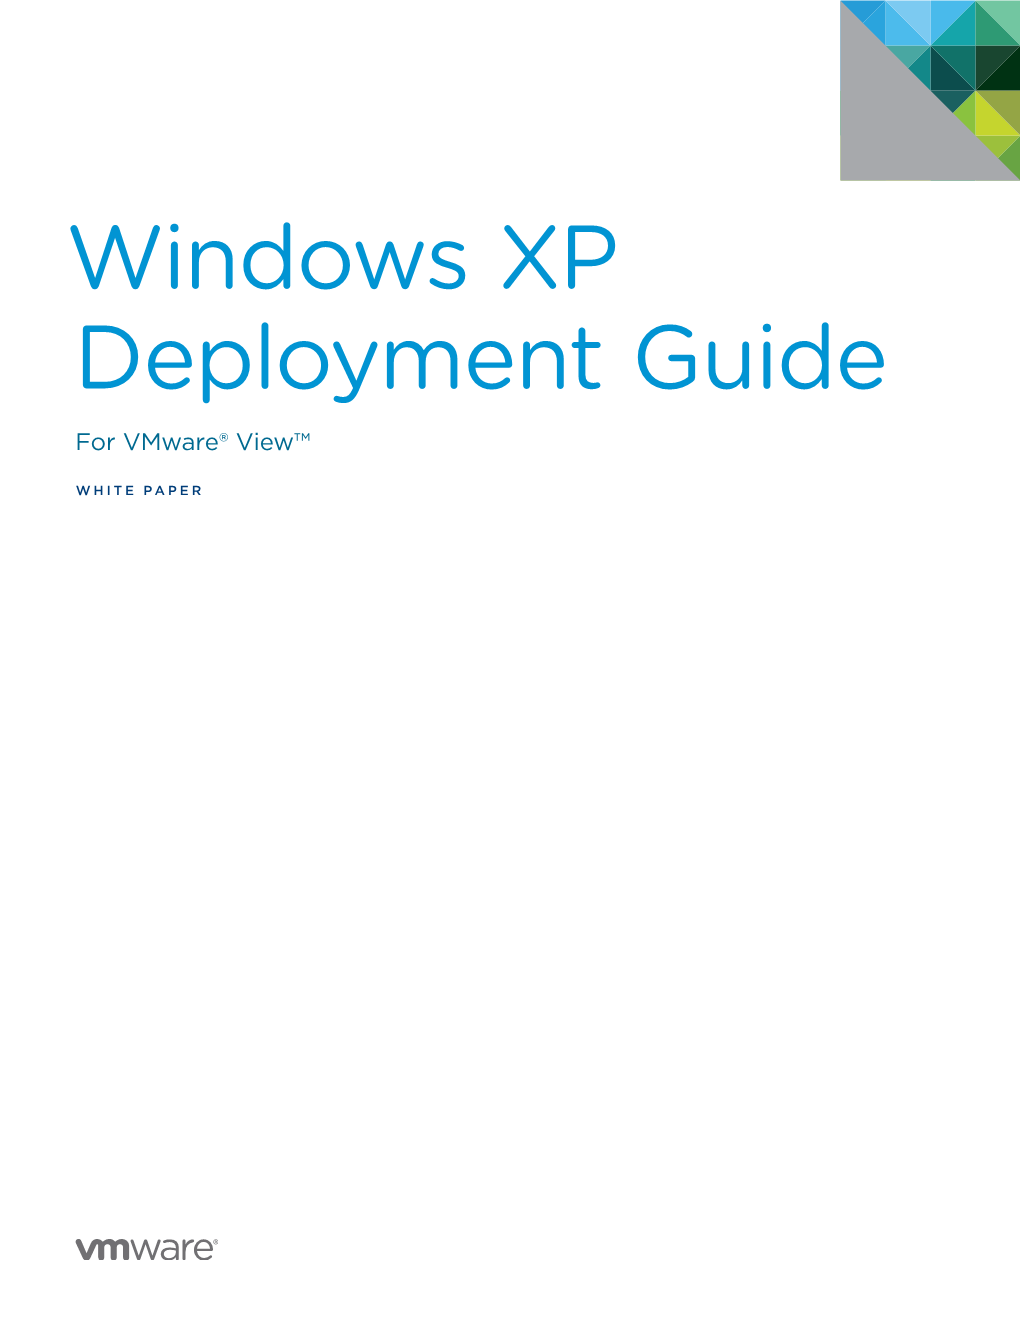 Windows XP Deployment Guide for Vmware® View™